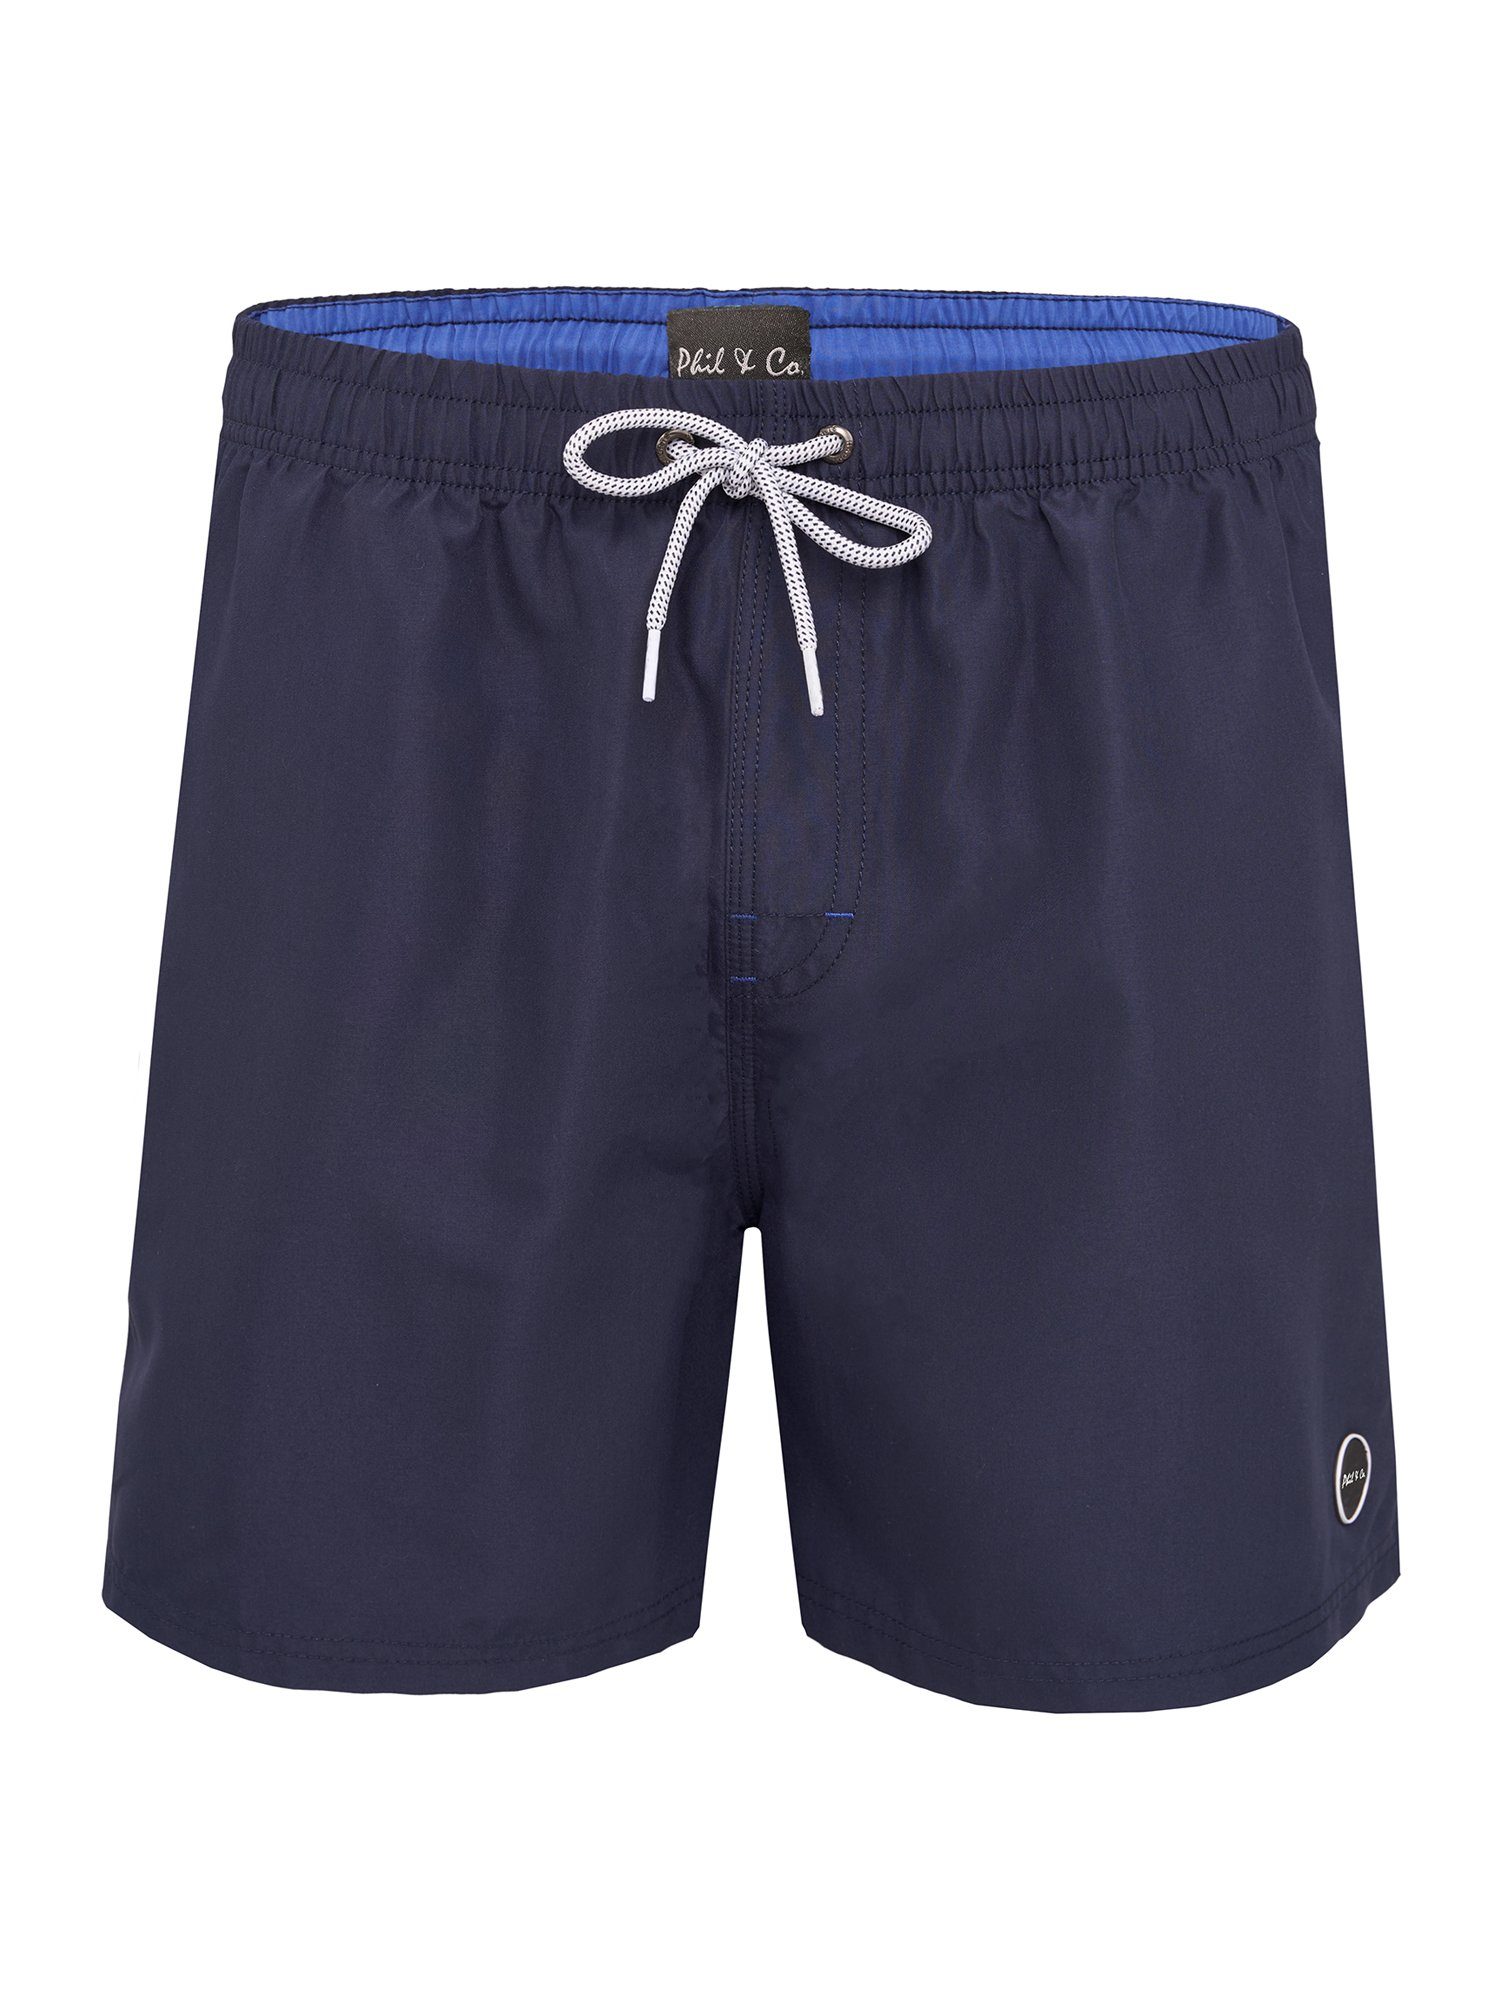 Phil Badeshorts navy Co. Classic & solid (1-St)